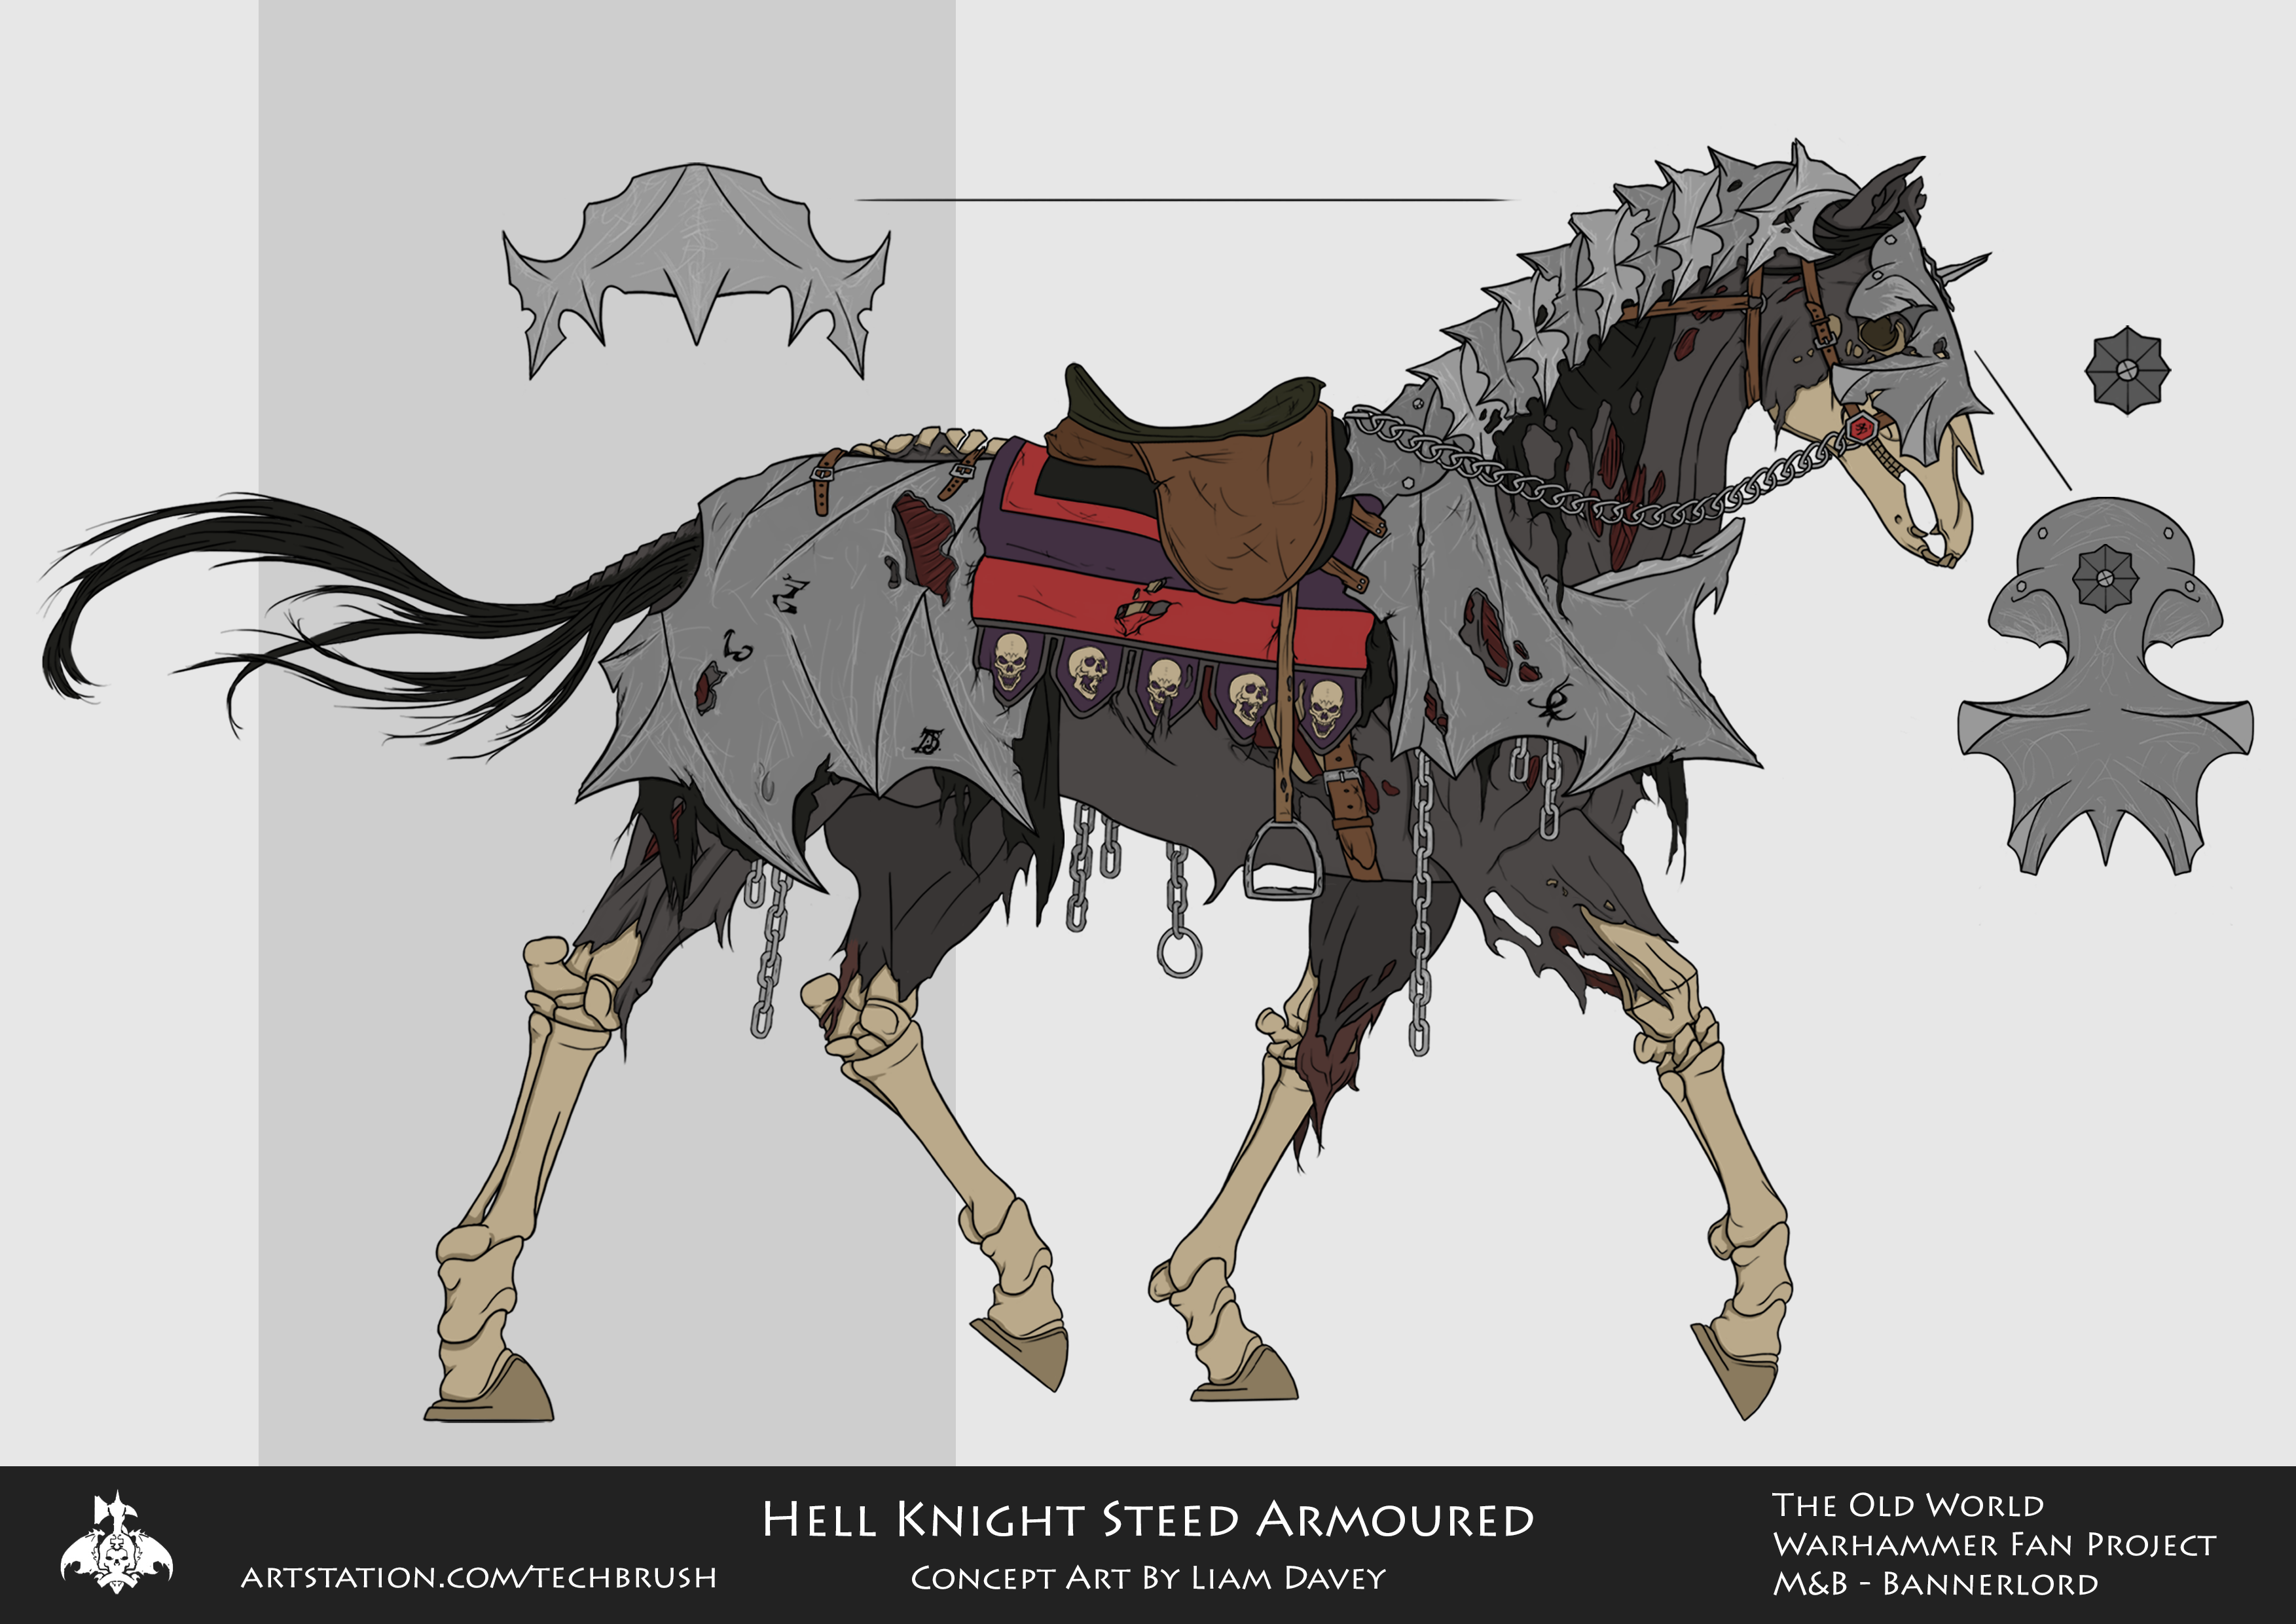 Hell Knight Steed Armoured